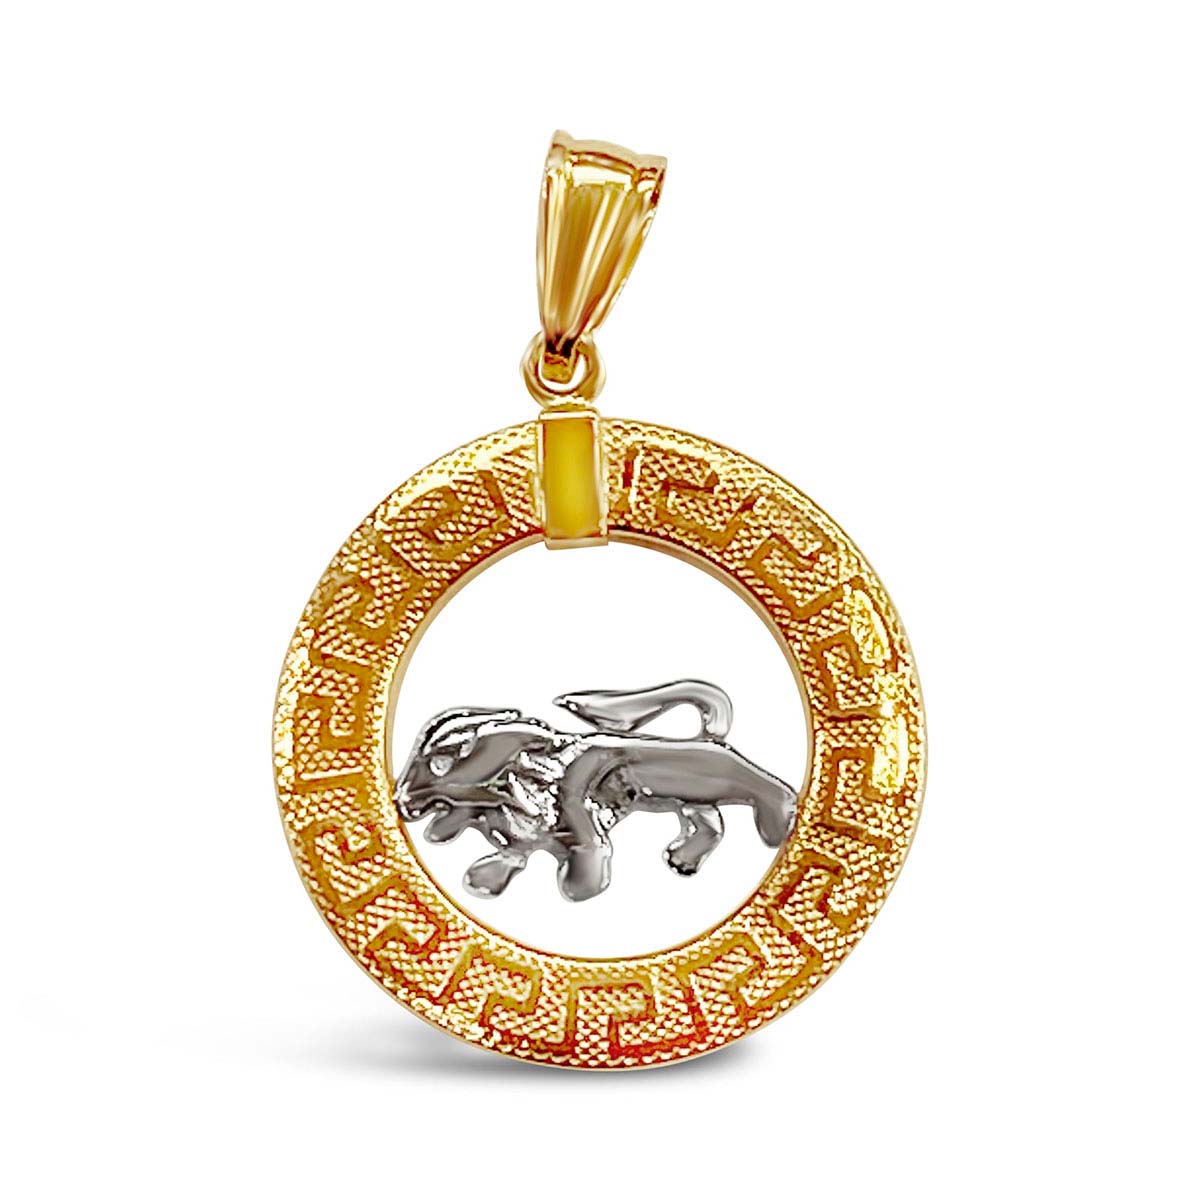 WHITE GOLD LEO ZODIAC SIGN IN CIRCLE ROPE PENDANT NECKLACE Gold Purity 14K 